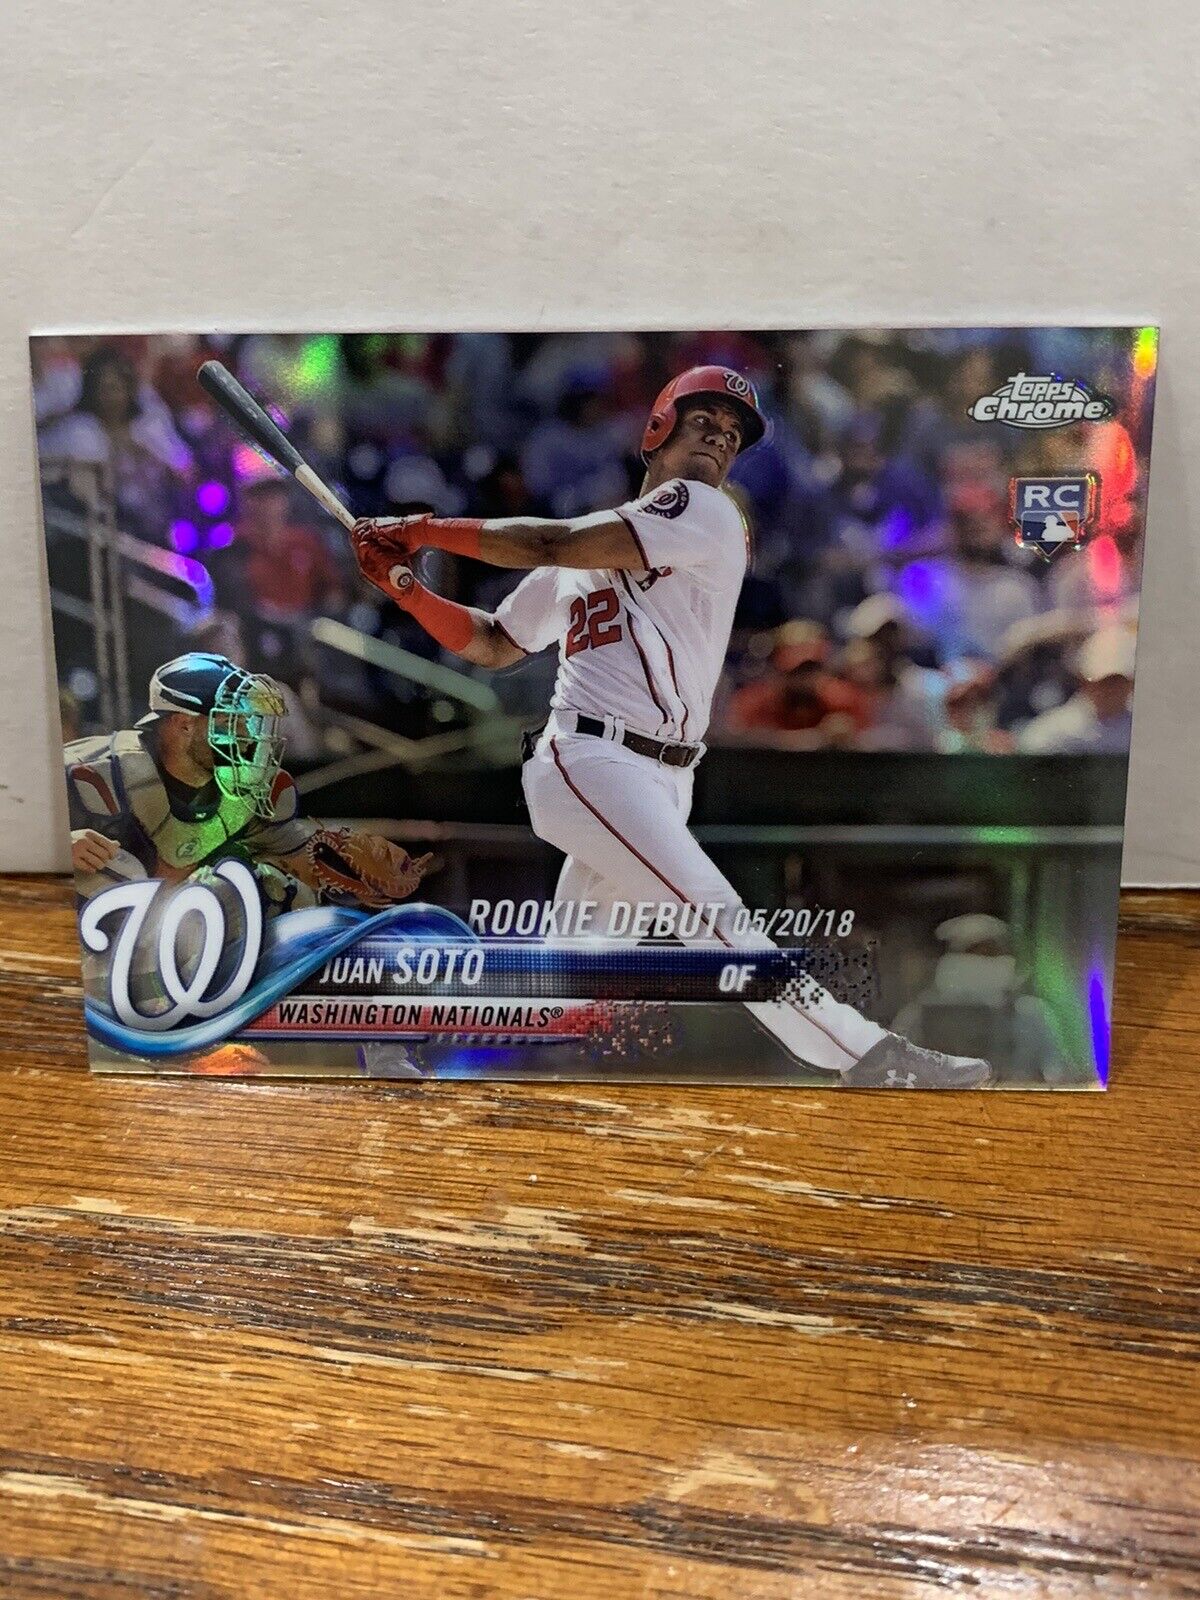 2018 Topps Chrome Update Juan Soto Refractor Rookie Debut RC #HMT98 027/250